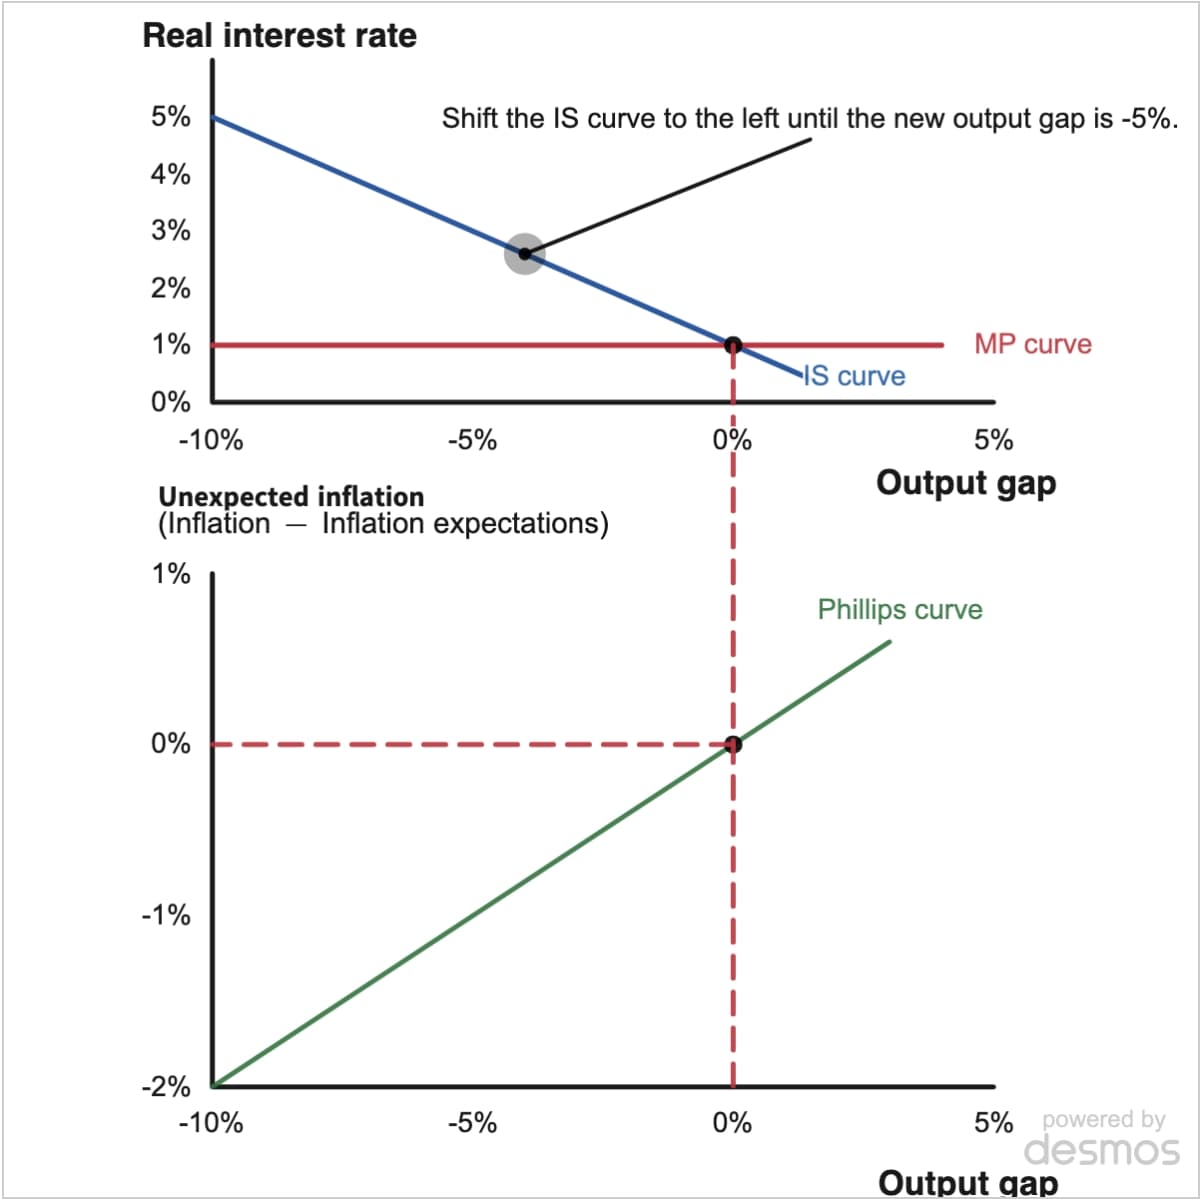 Real interest rate
Shift the IS curve to the left until the new output gap is -5%.
5%
4%
3%
2%
1%
0%
-10%
-5%
Unexpected inflation
(Inflation — Inflation expectations)
1%
-
0%
-1%
MP curve
IS curve
0%
5%
Output gap
Phillips curve
-2%
-10%
-5%
0%
5% powered by
desmos
Output gap